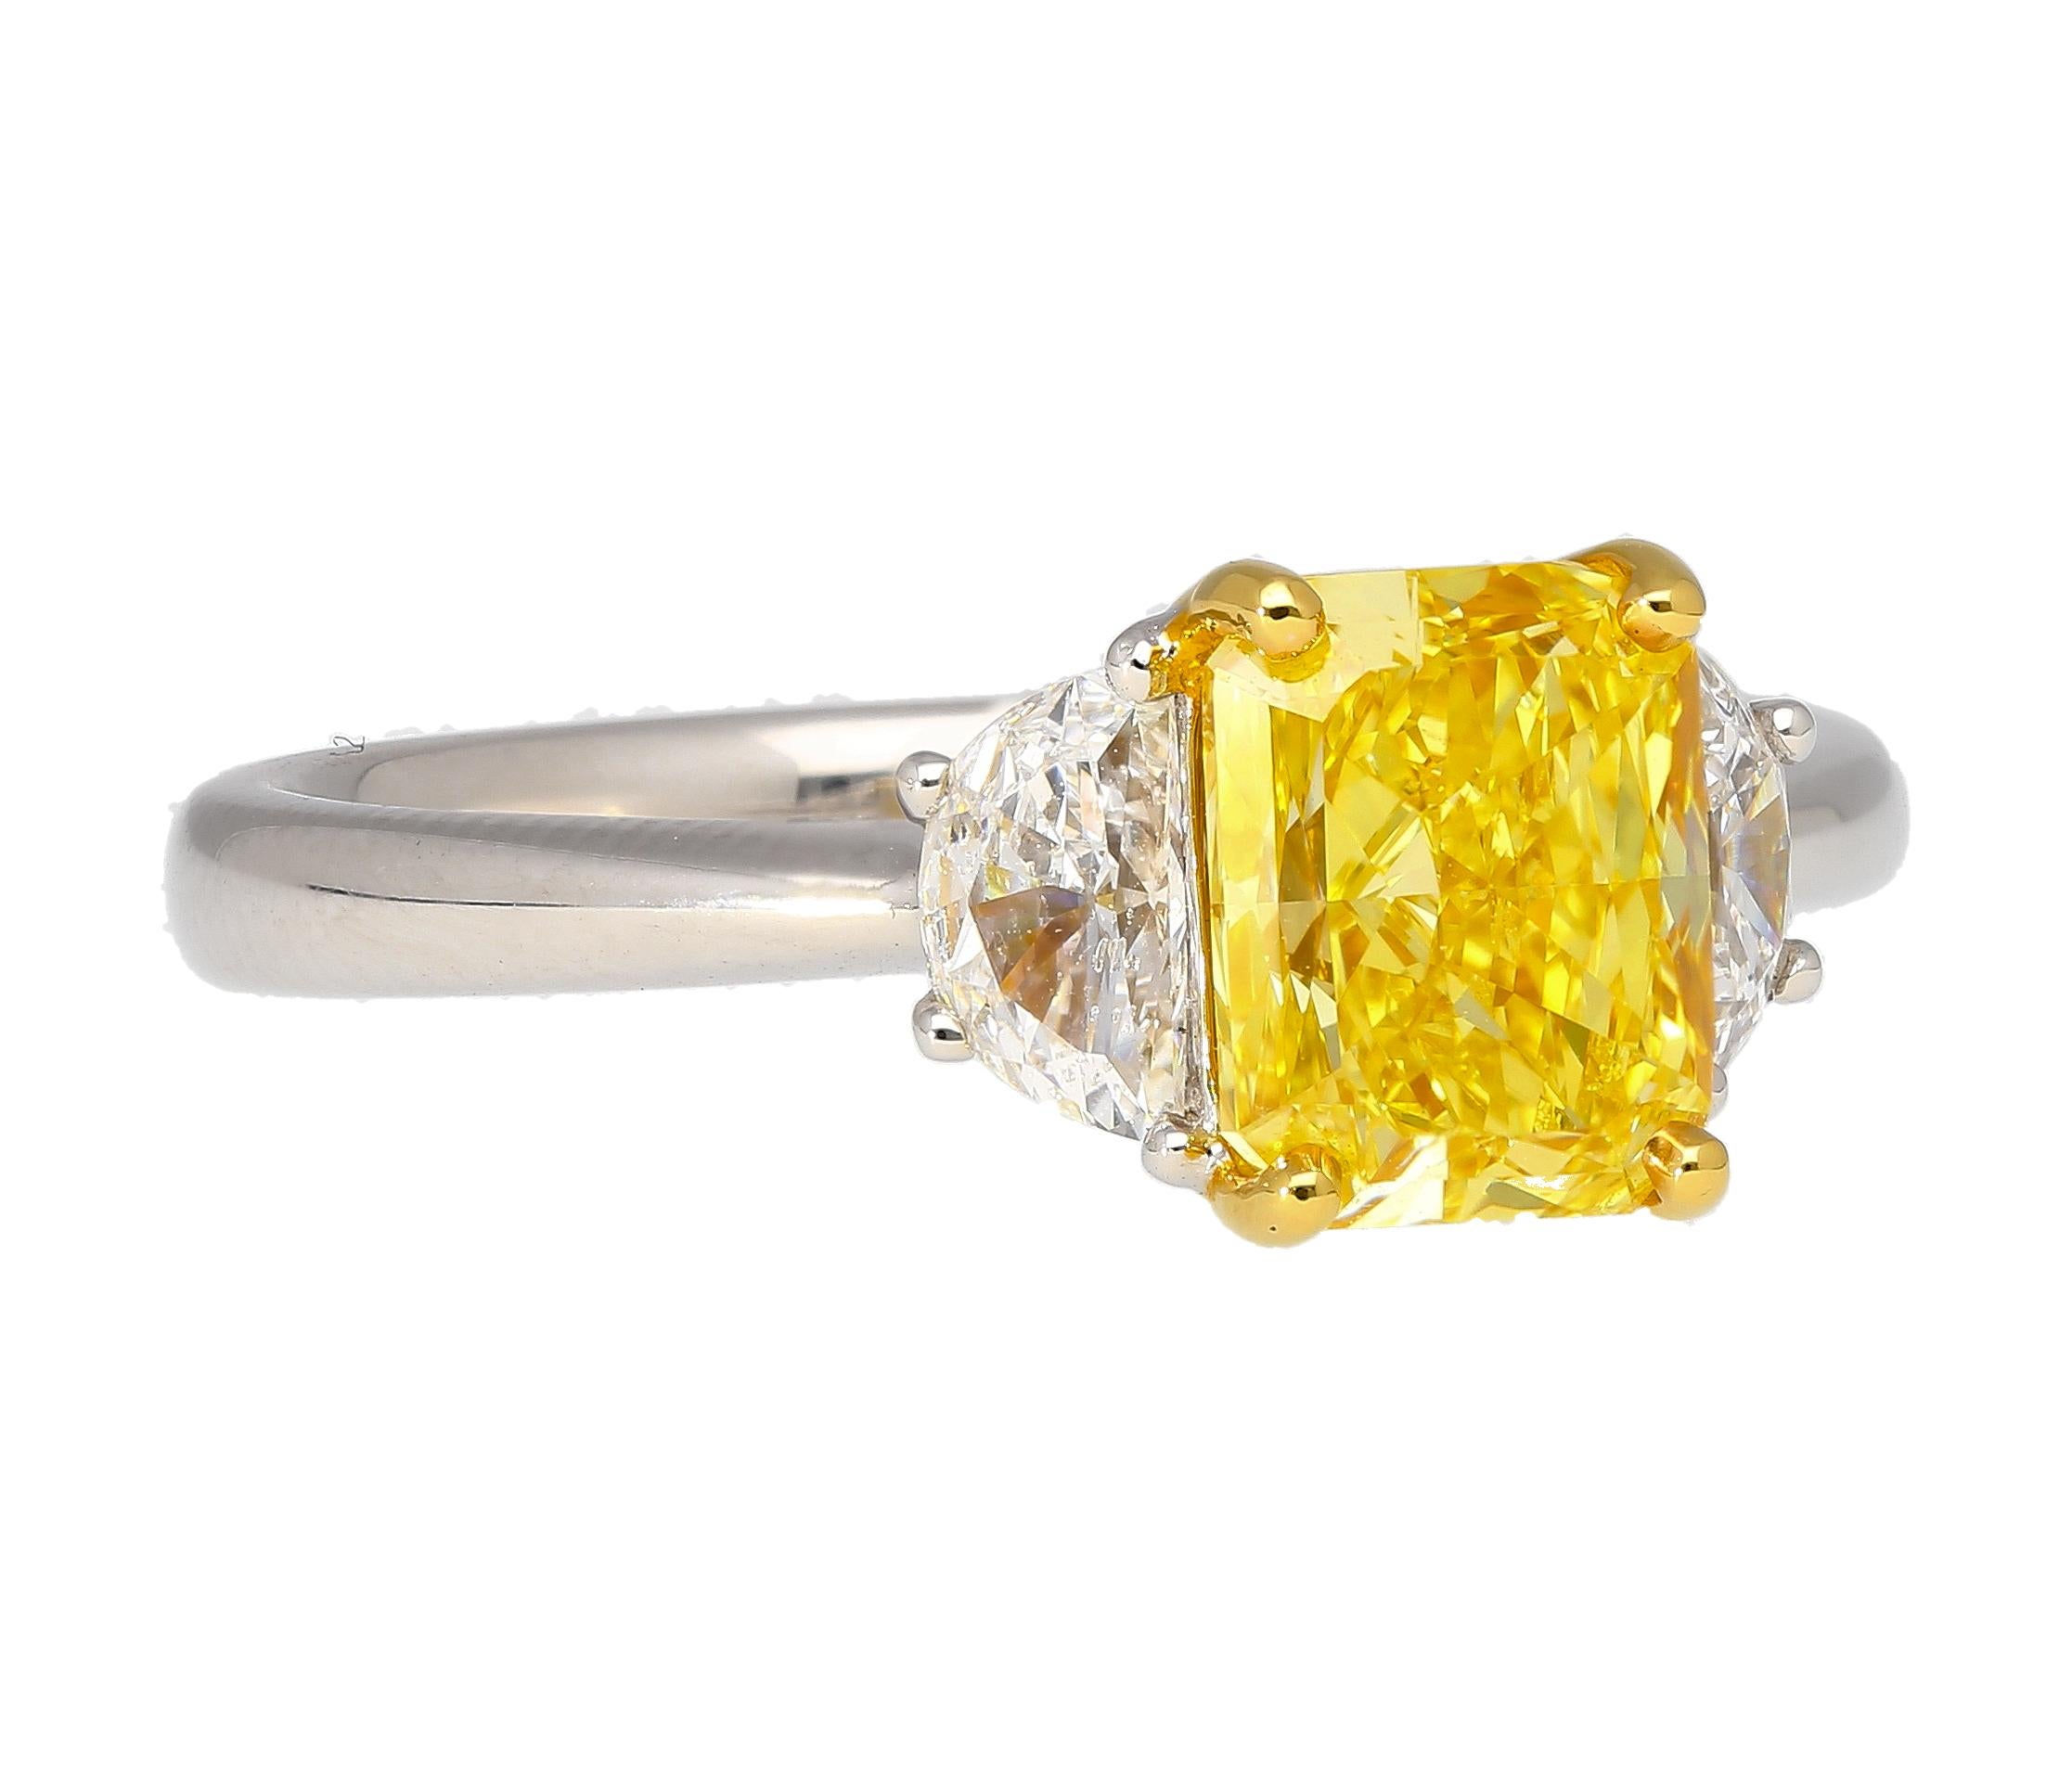 Prepare to be mesmerized by the extraordinary beauty of this three stone engagement ring, featuring a GIA certified 2.01 carat fancy vivid yellow radiant cut diamond center stone. Flanked by two half-moon cut F color diamond side stones. Set in 18K